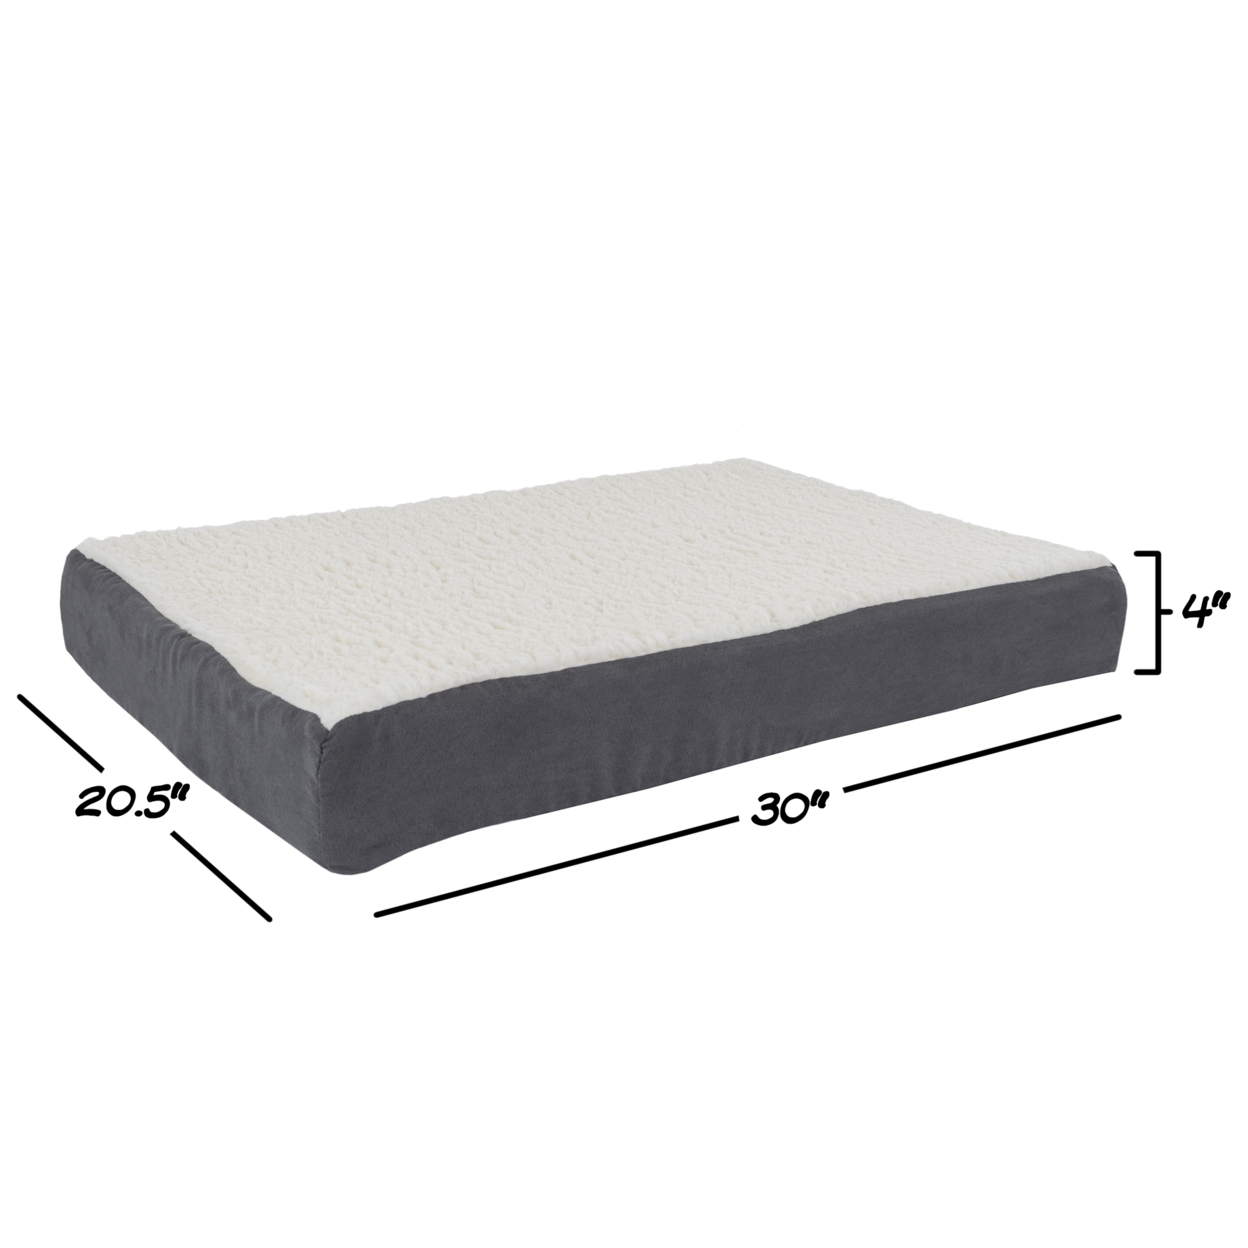 Orthopedic Sherpa Top Pet Bed With Memory Foam And Removable Cover 30 X 20.5 4 Gray Medium